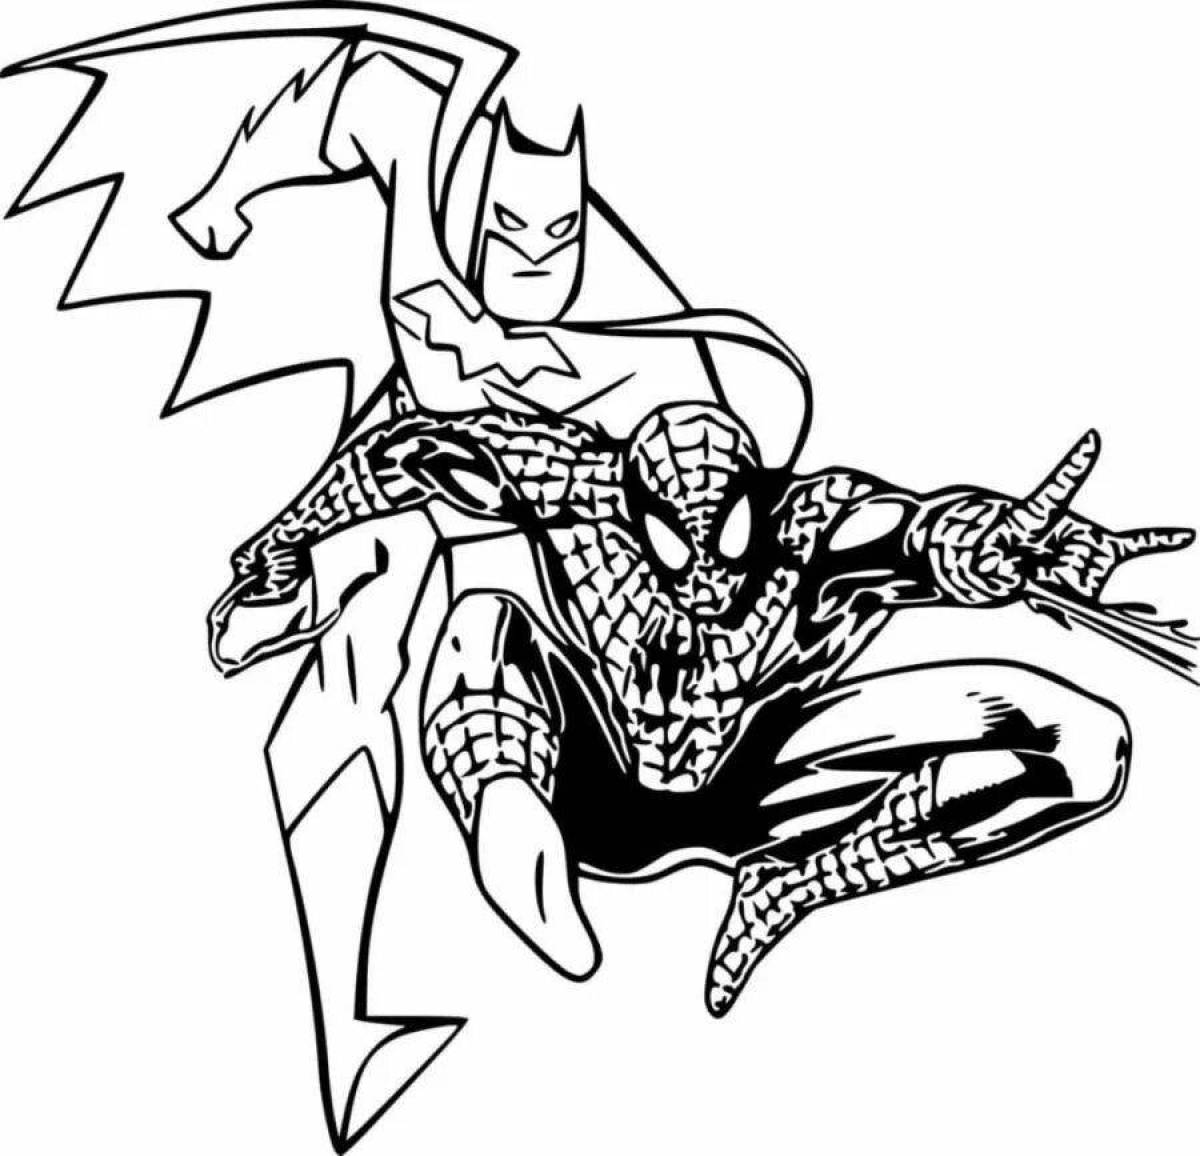 Bright coloring pages batman and spider-man